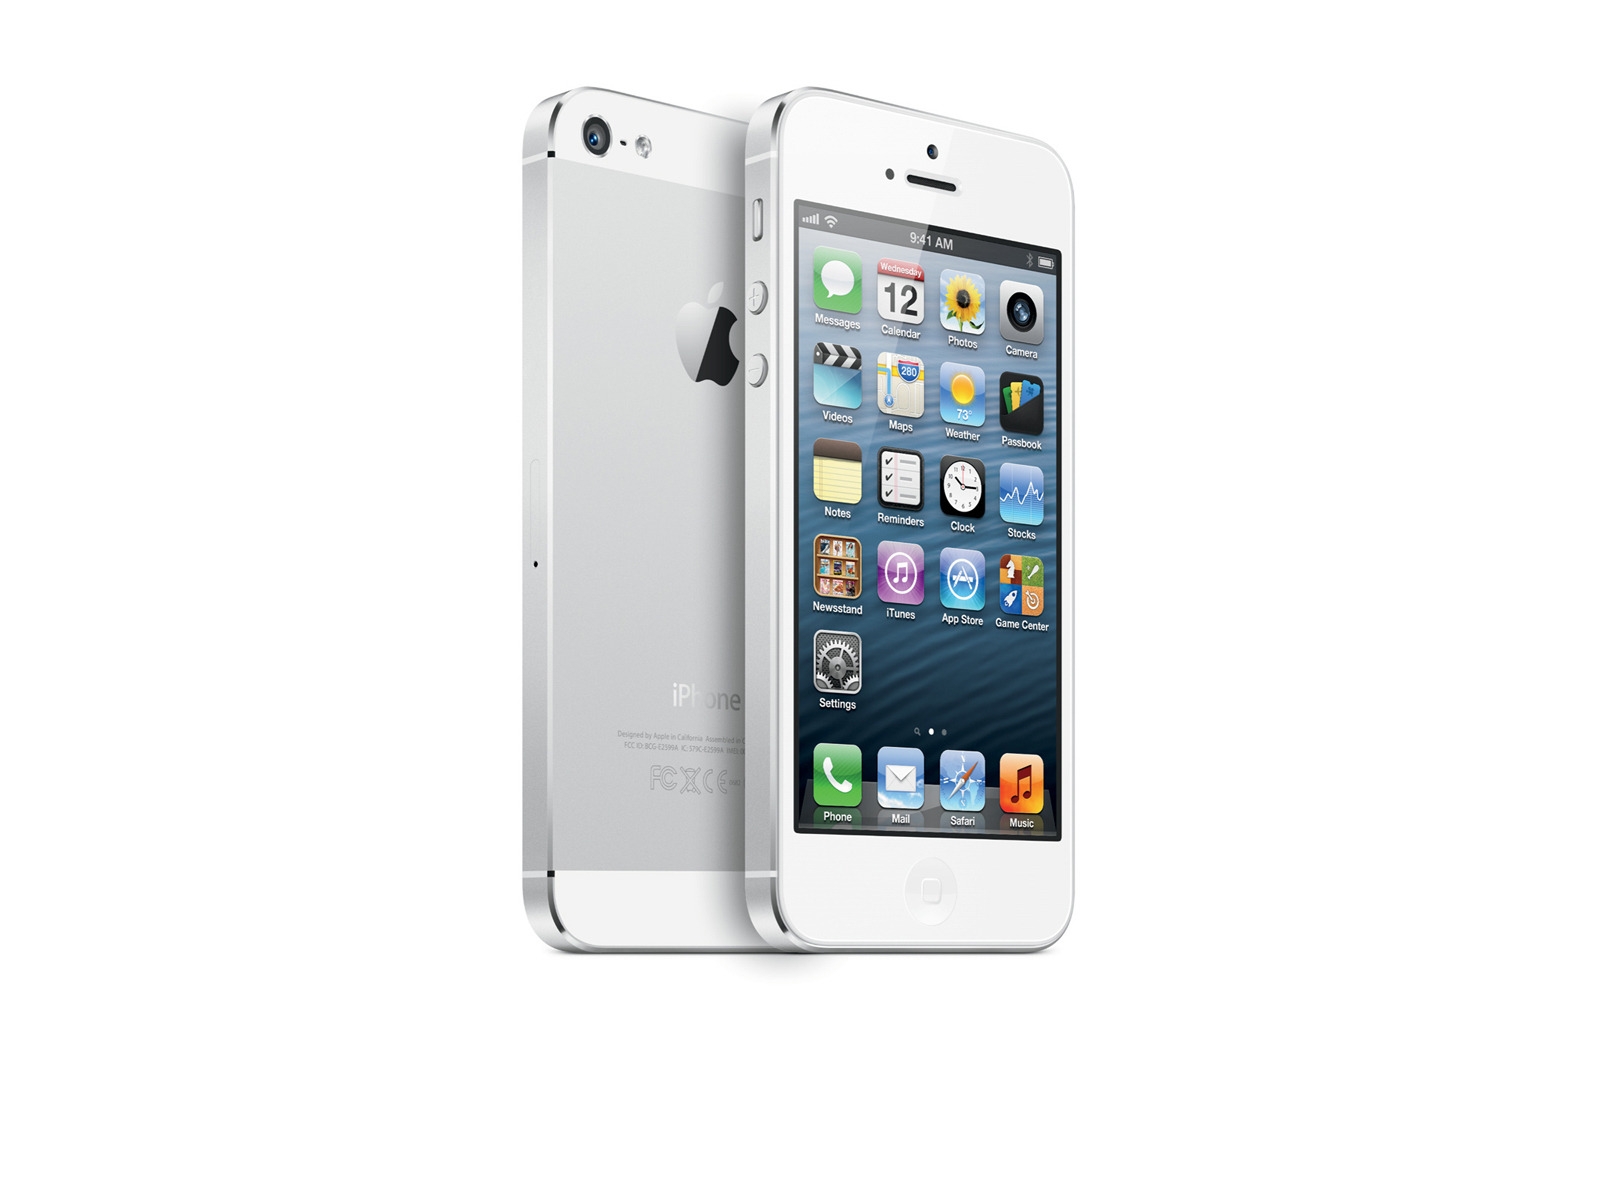 White iPhone 5 for 1600 x 1200 resolution